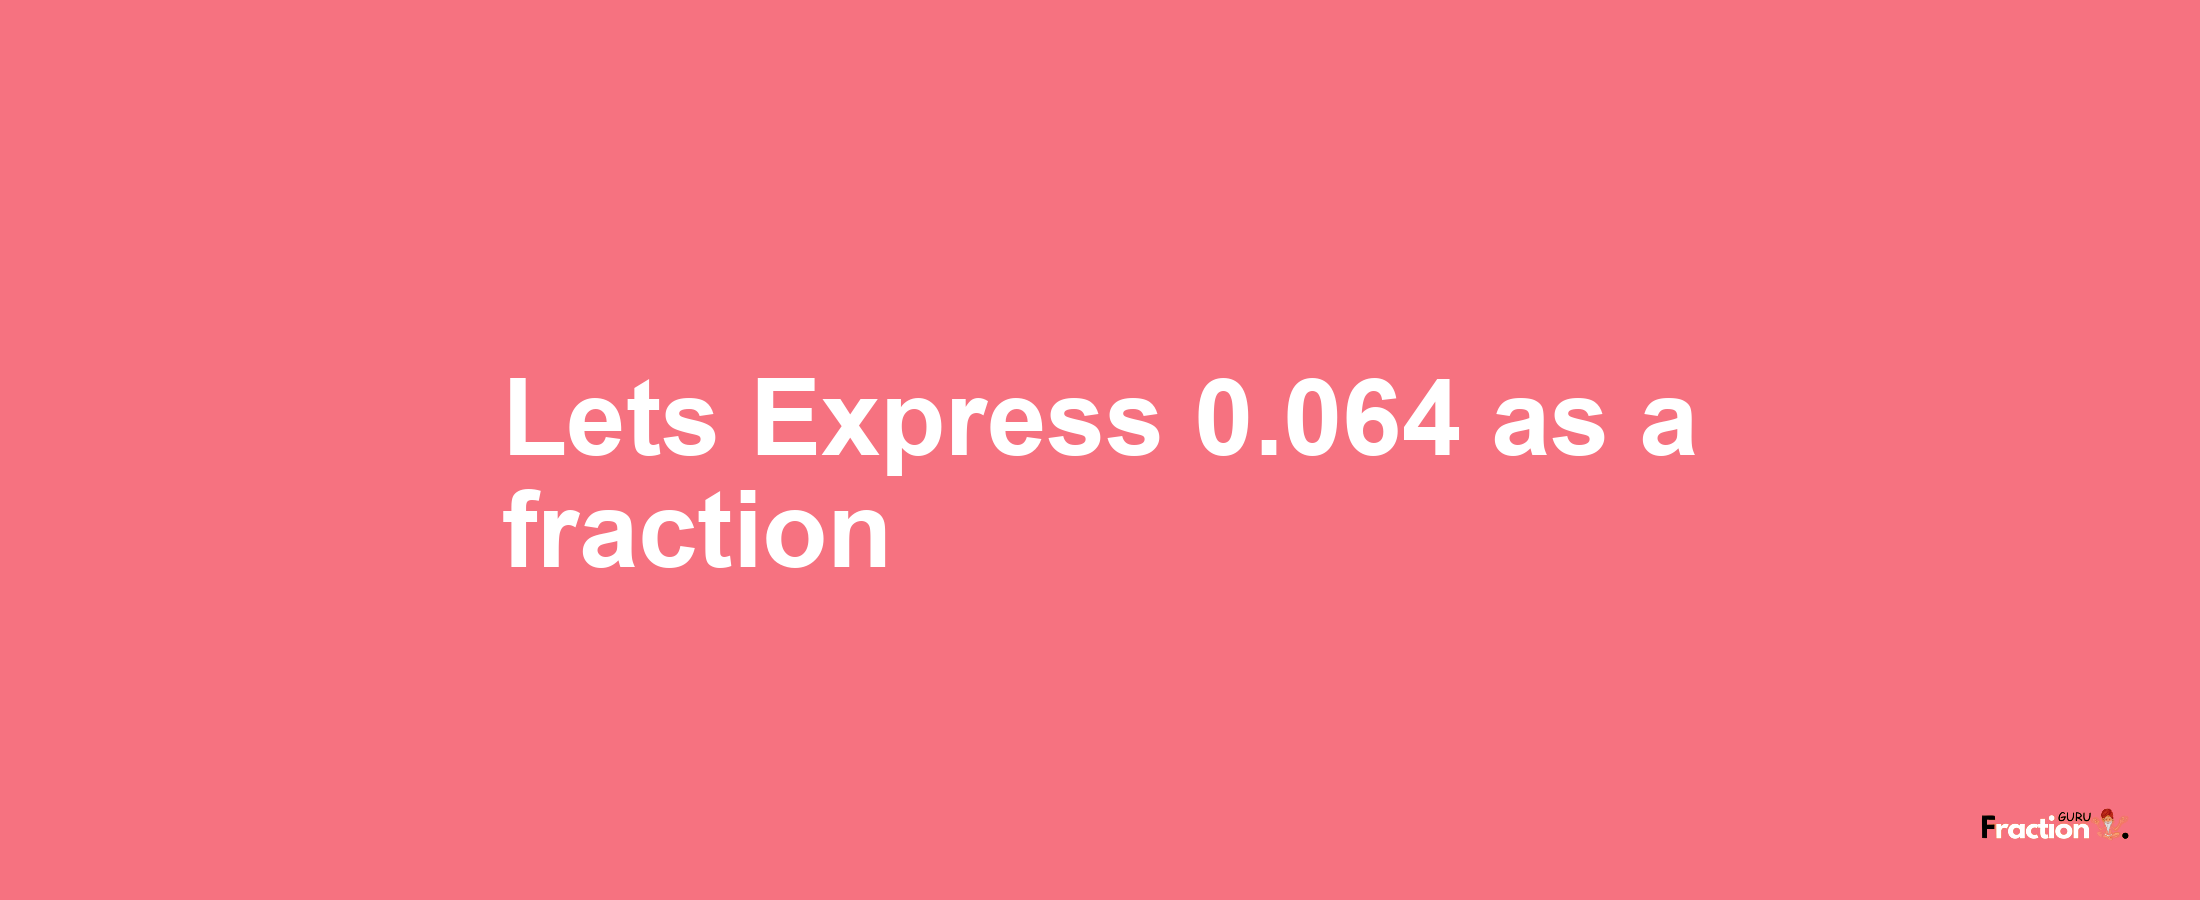 Lets Express 0.064 as afraction